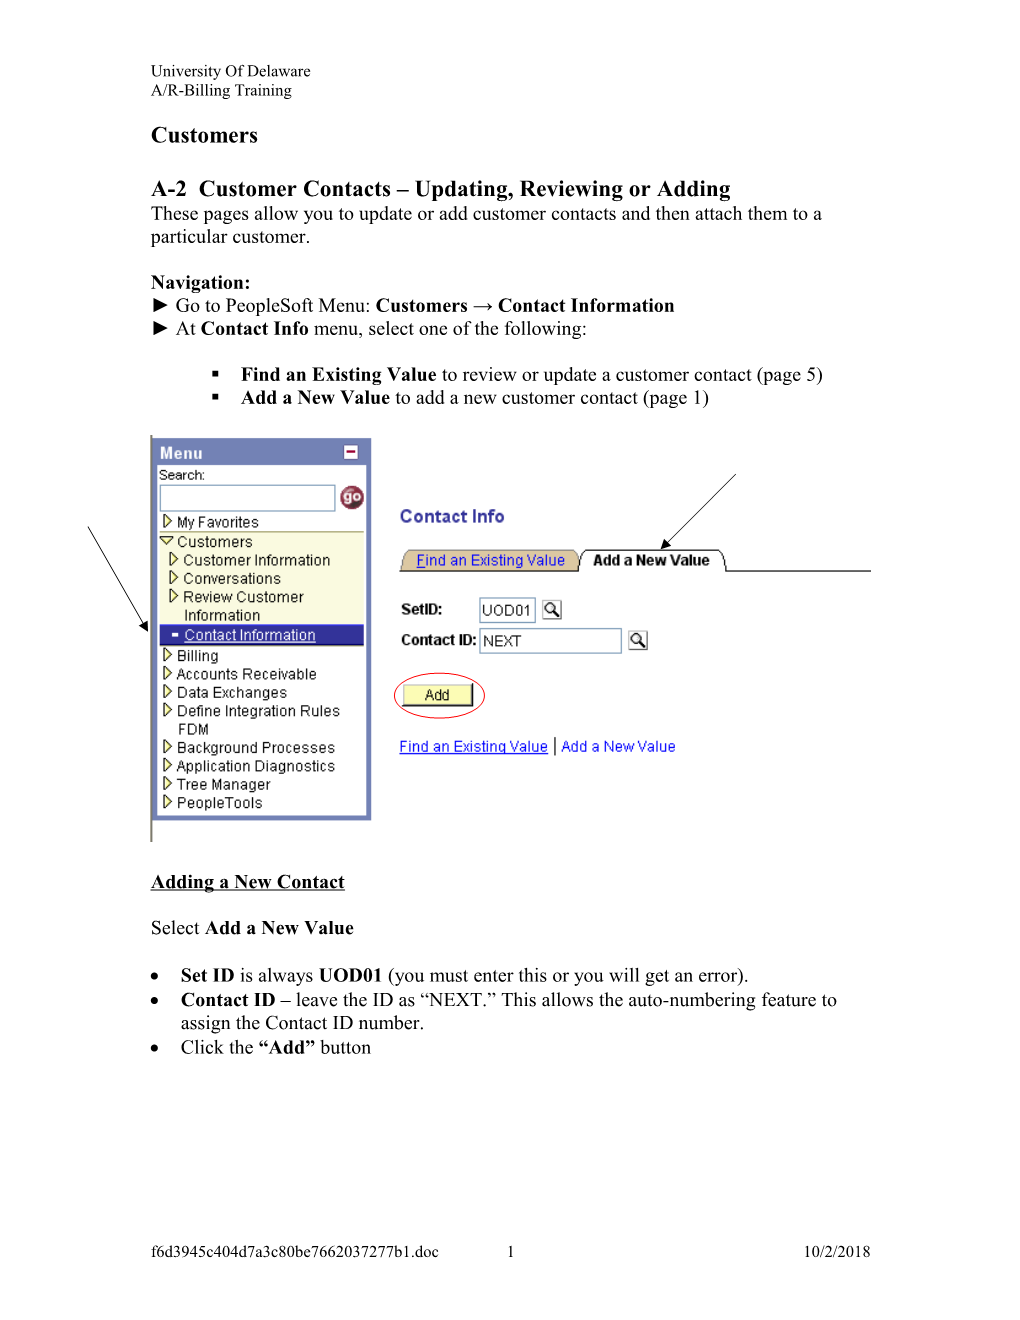 A-2 Customer Contacts Updating, Reviewing Or Adding